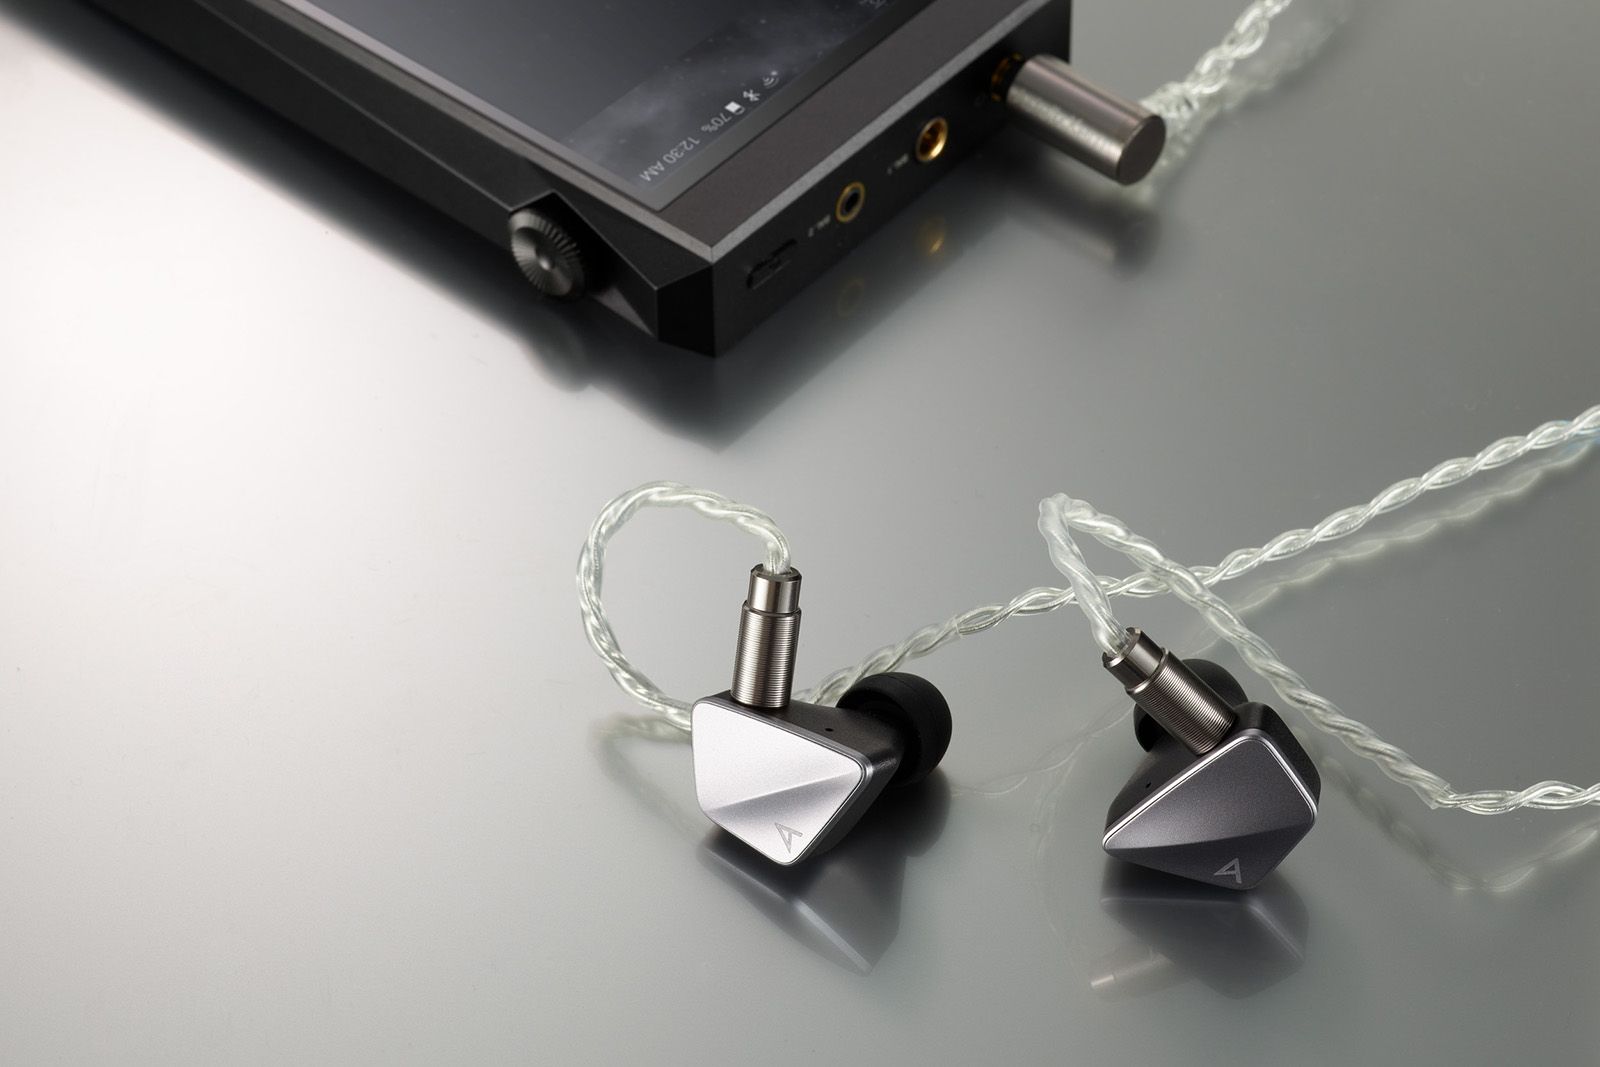 Astell&Kern AK Zero1 in-ears use three different drivers for reference grade audio photo 1